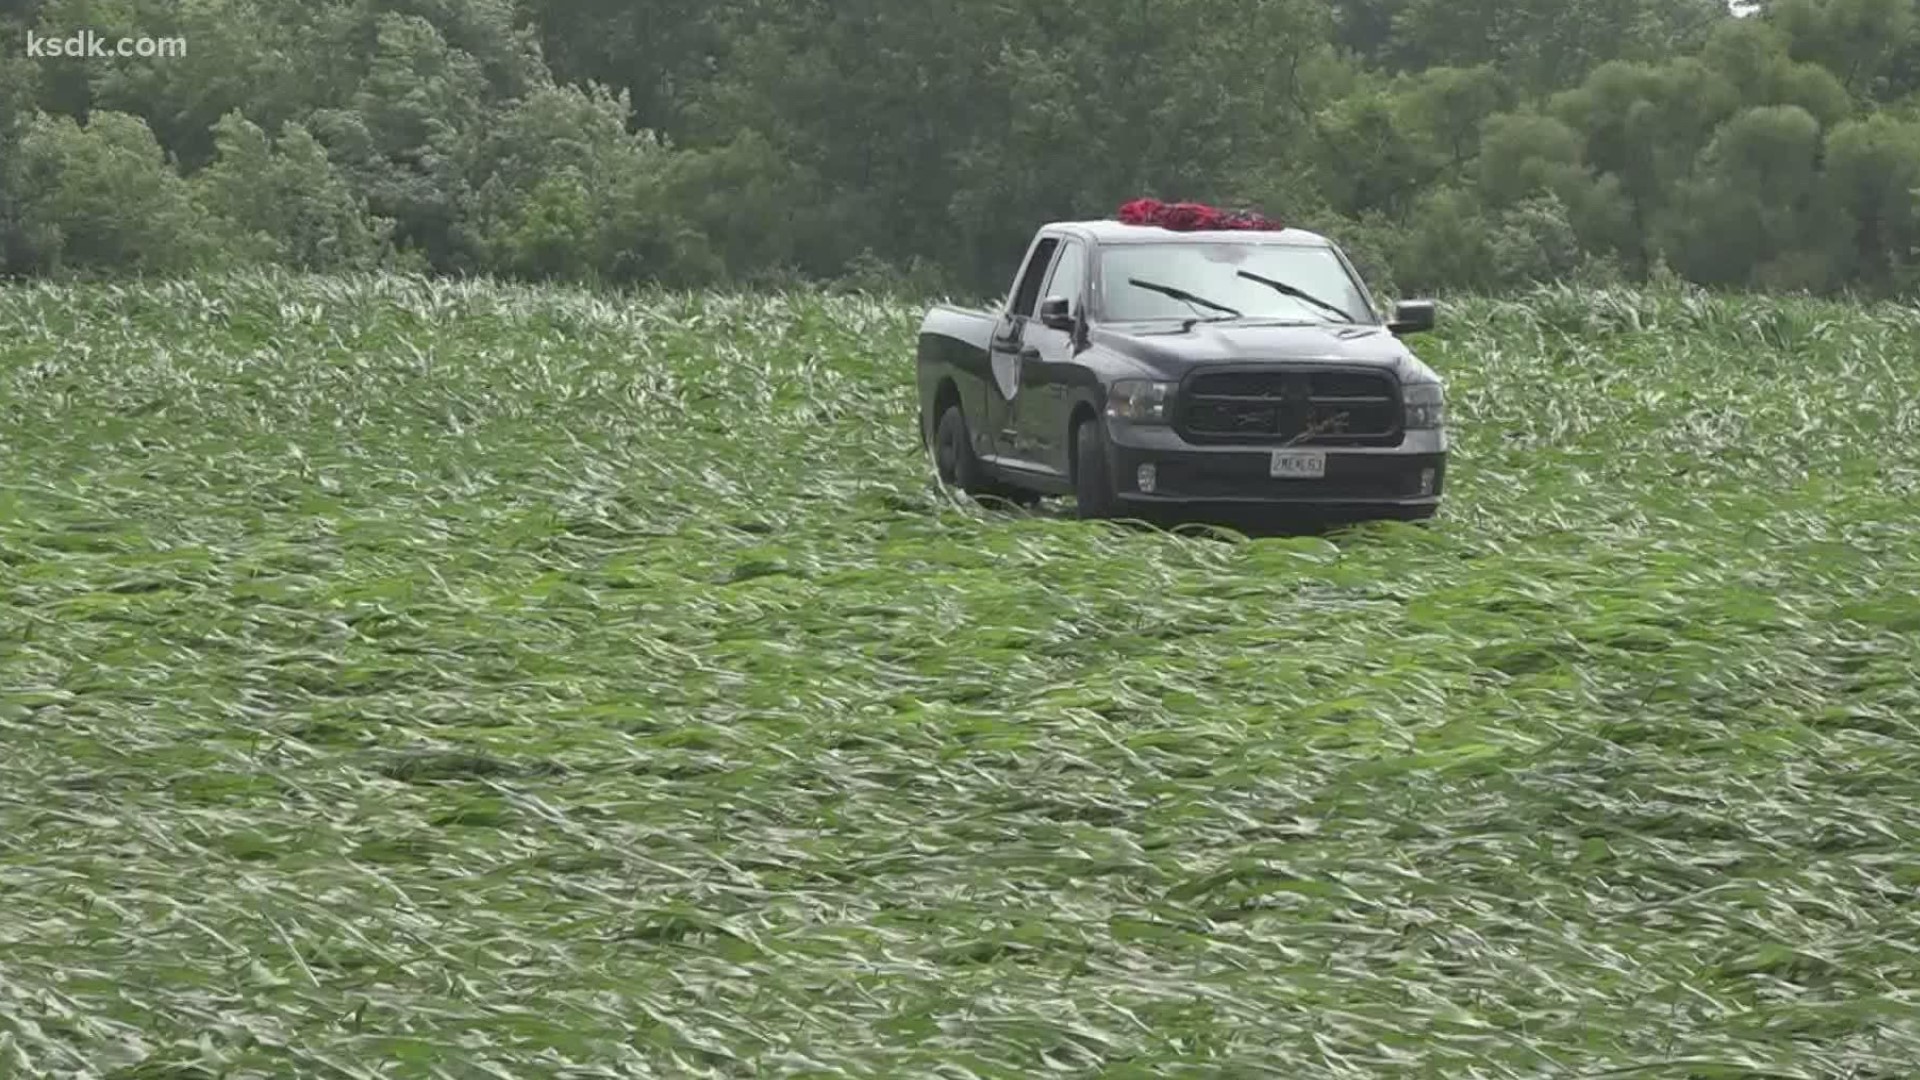 Rushing waters lift and carry pickup into middle of corn field; driver stayed in cab, is OK